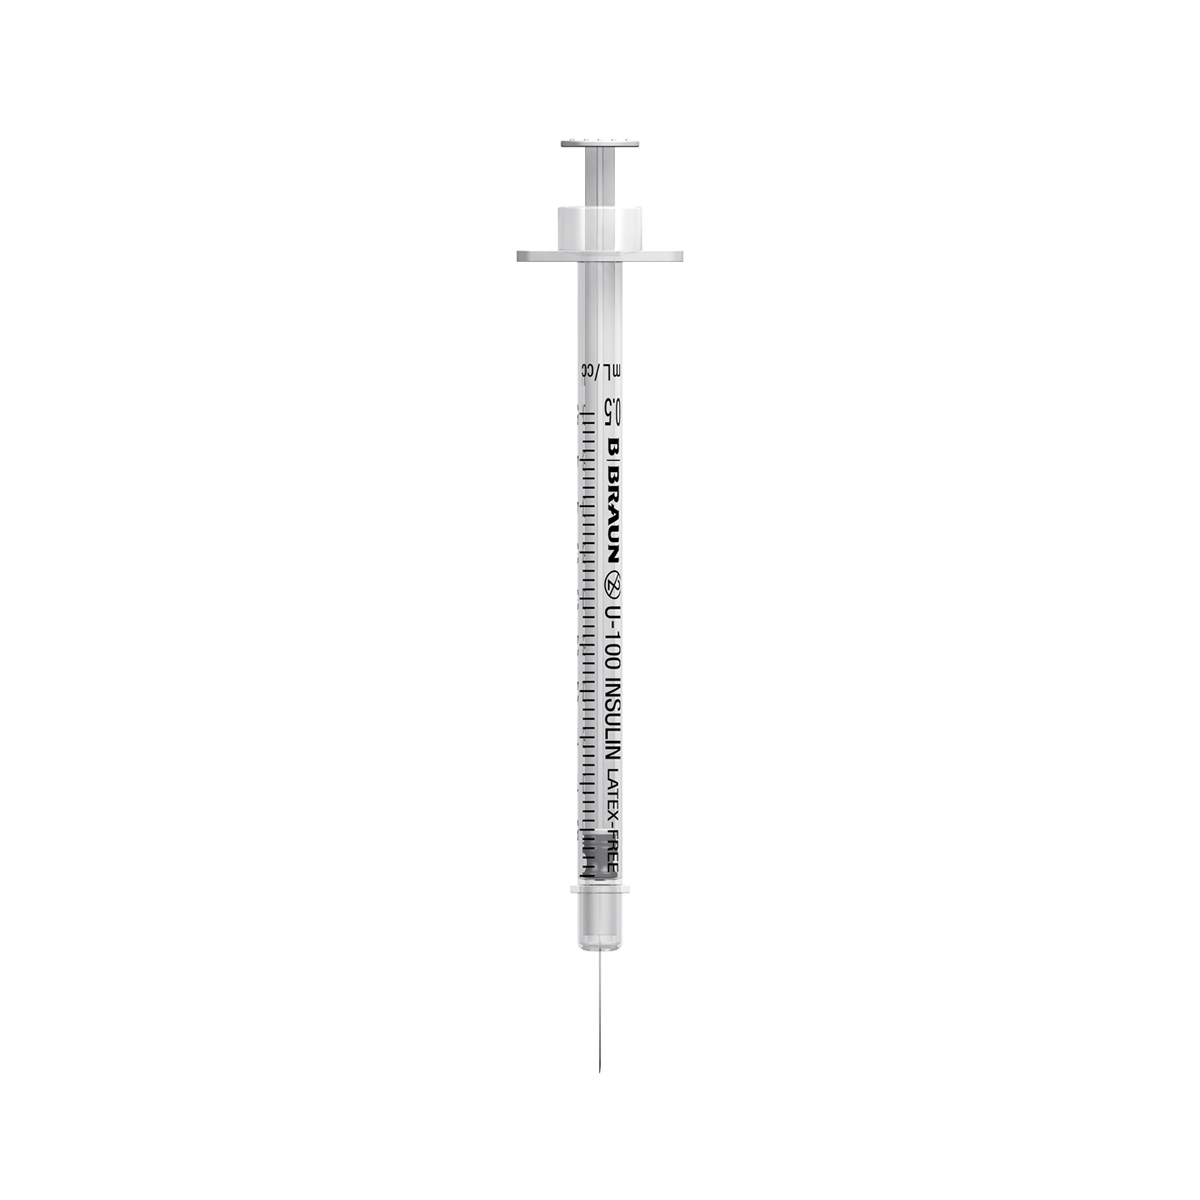 0.5ml 30G 12mm needle BBraun Omnican  insulin syringe (temp out of stock)